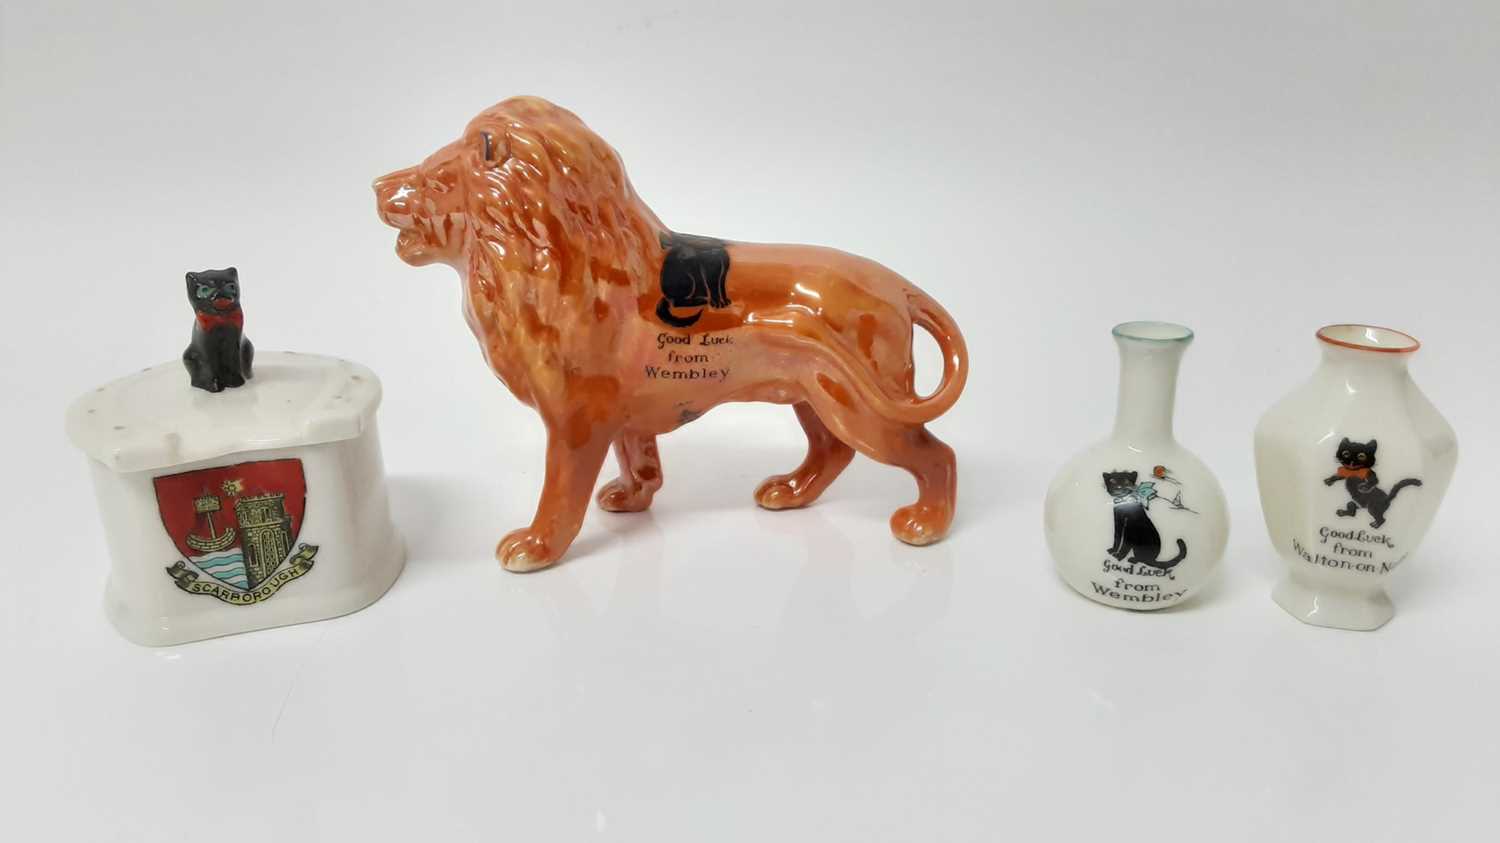 Lot 169 - Arcadian orange lustre Lion decorated with a black cat - Good Luck from Wembley, together with three other Arcadian Crested Black Cat items (4)